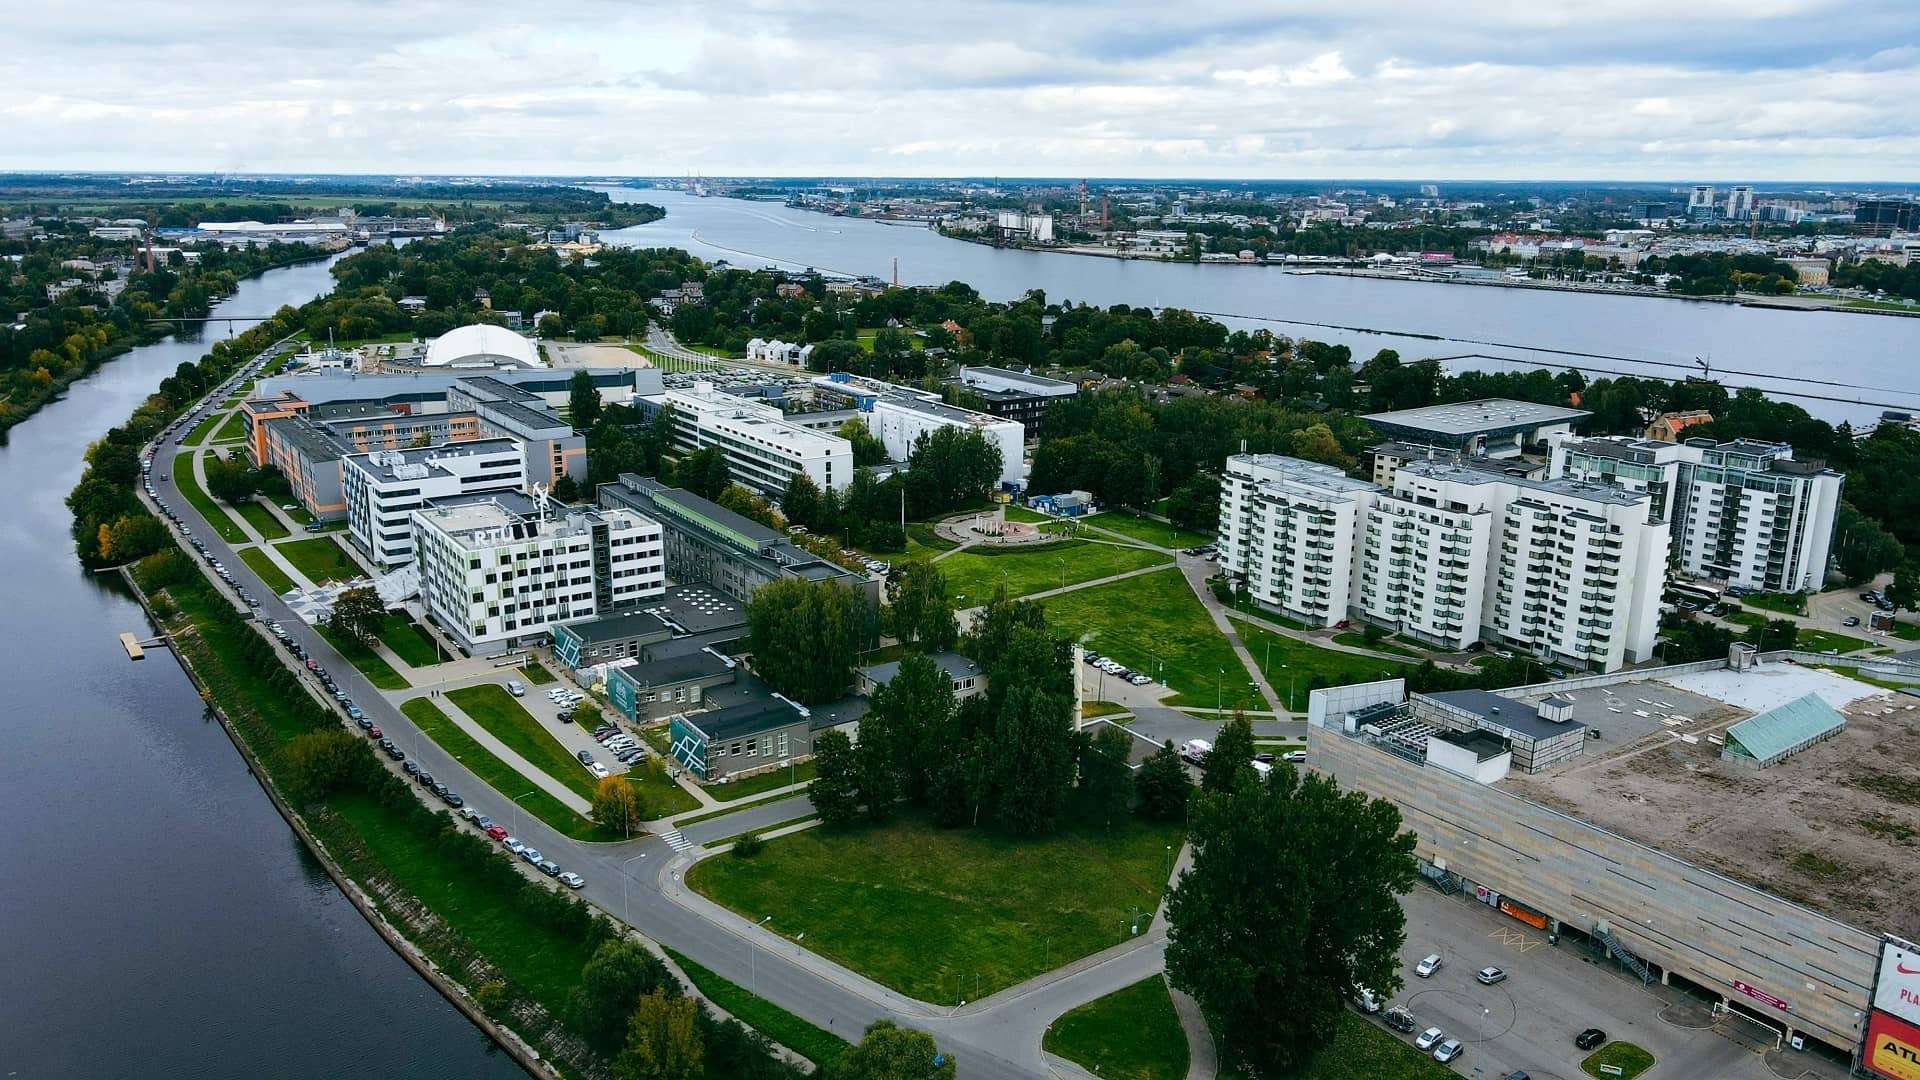 RTU has been recognised as the best higher education institution in engineering and technology in the Baltics by the prestigious QS World University Rankings by Subject